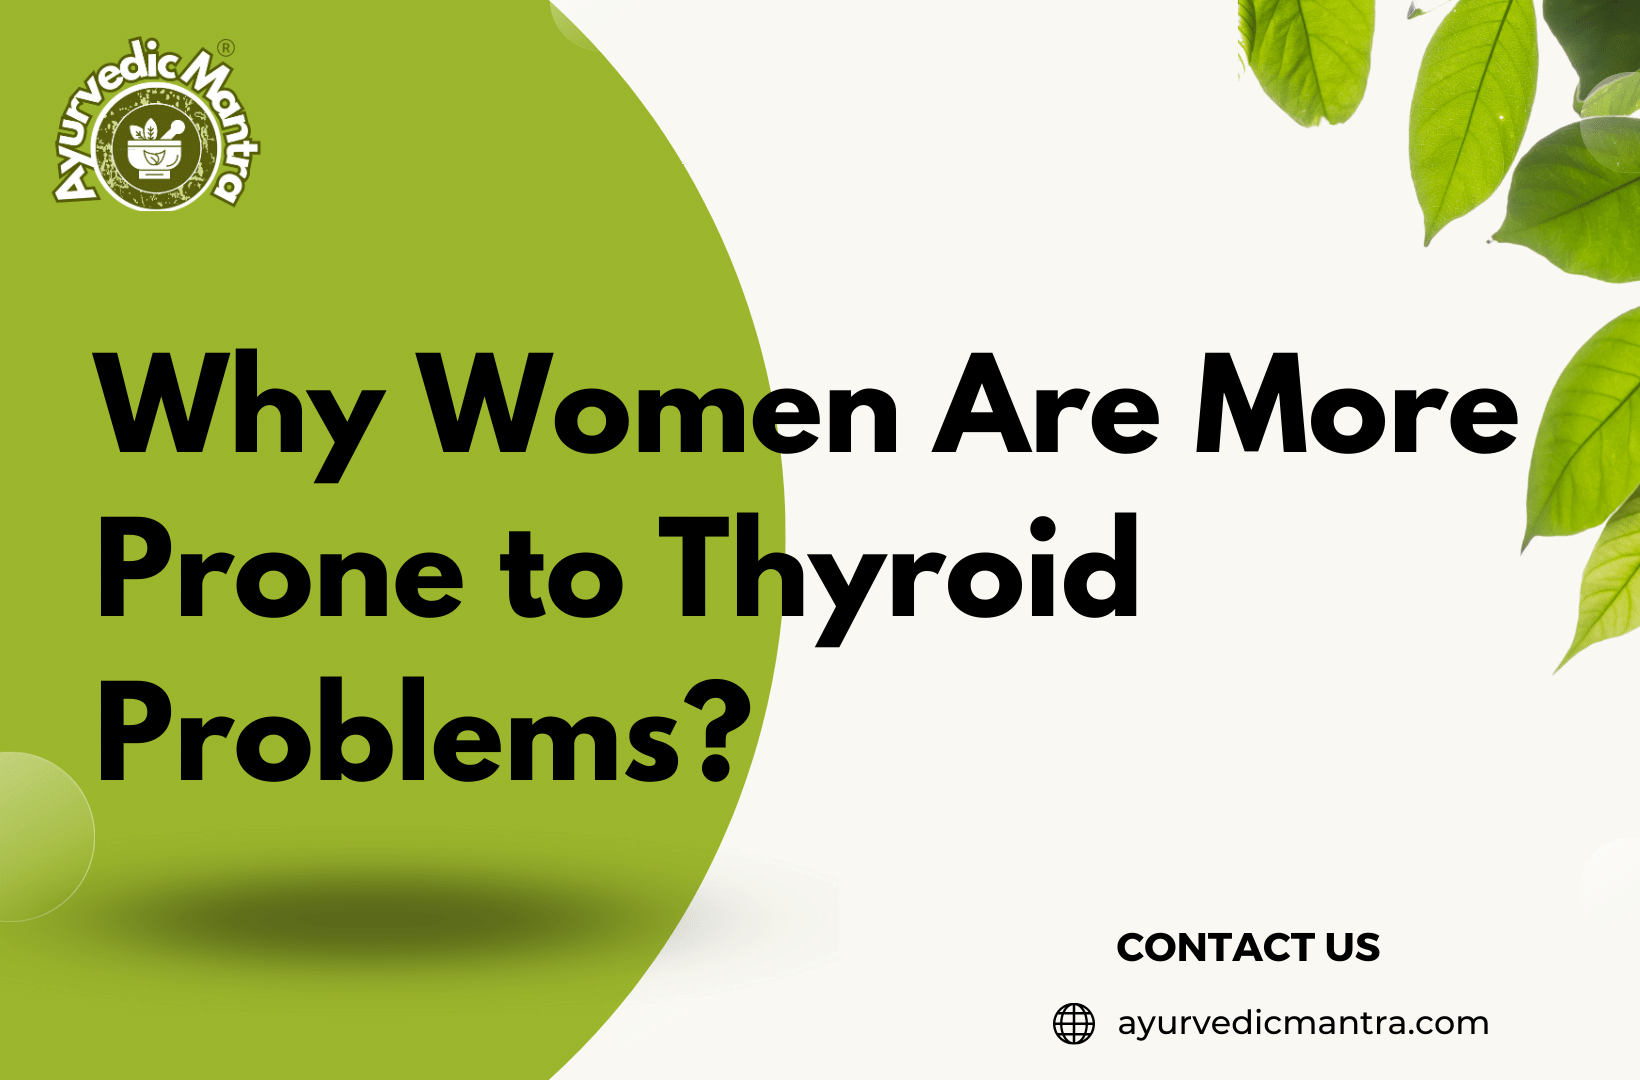 Why Women Are More Prone to Thyroid Problems